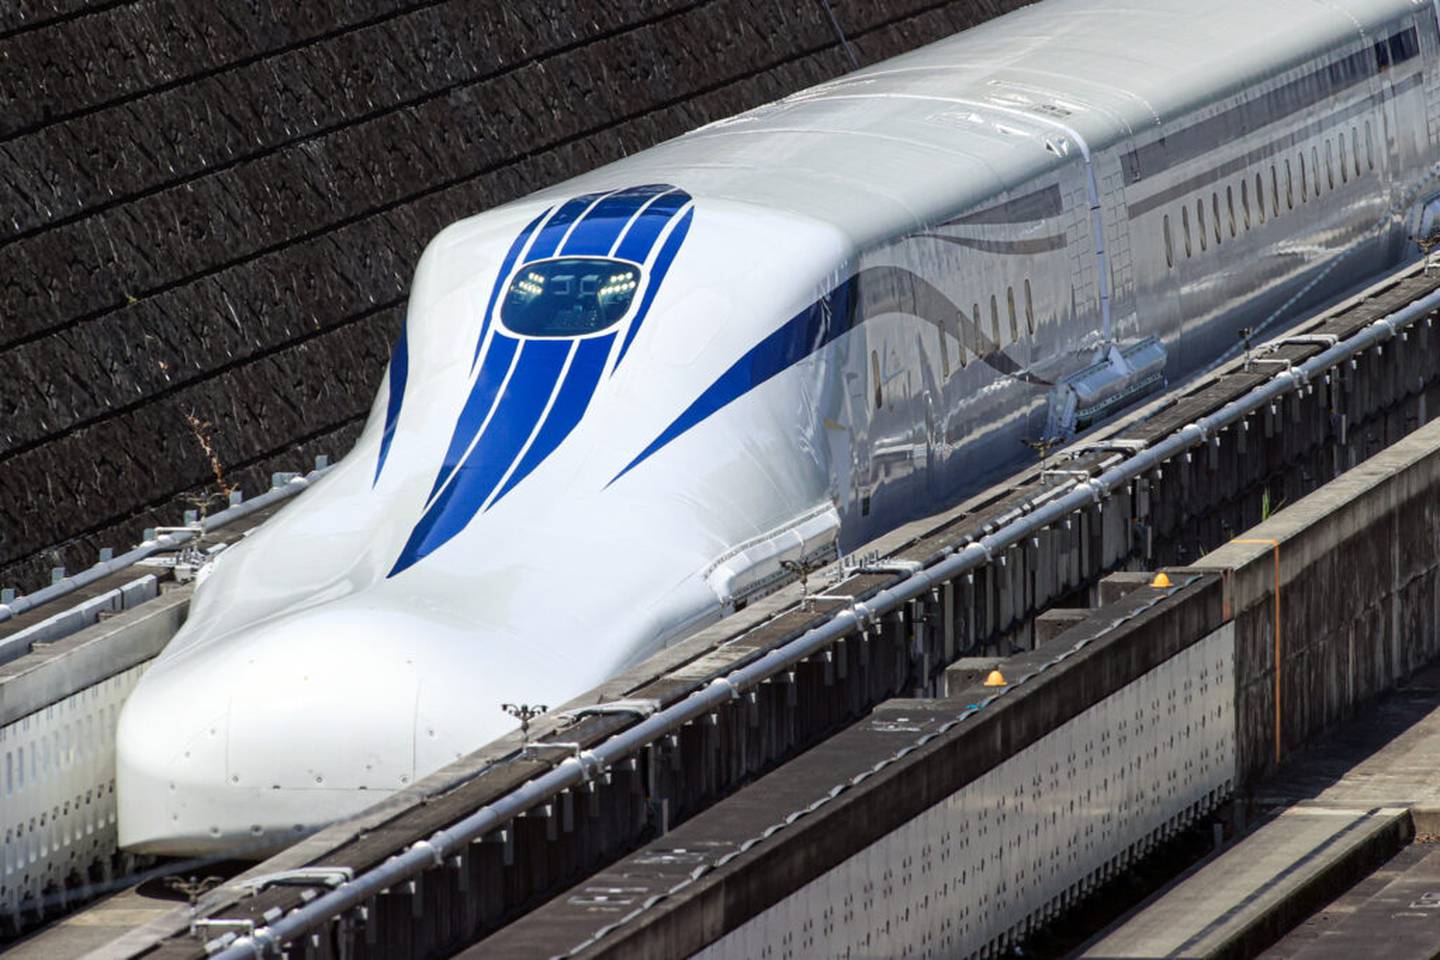 The Baltimore-Washington Rapid Rail wants to bring a Superconducting Maglev to the Northeast, connecting Baltimore to Washington D.C. and eventually New York.